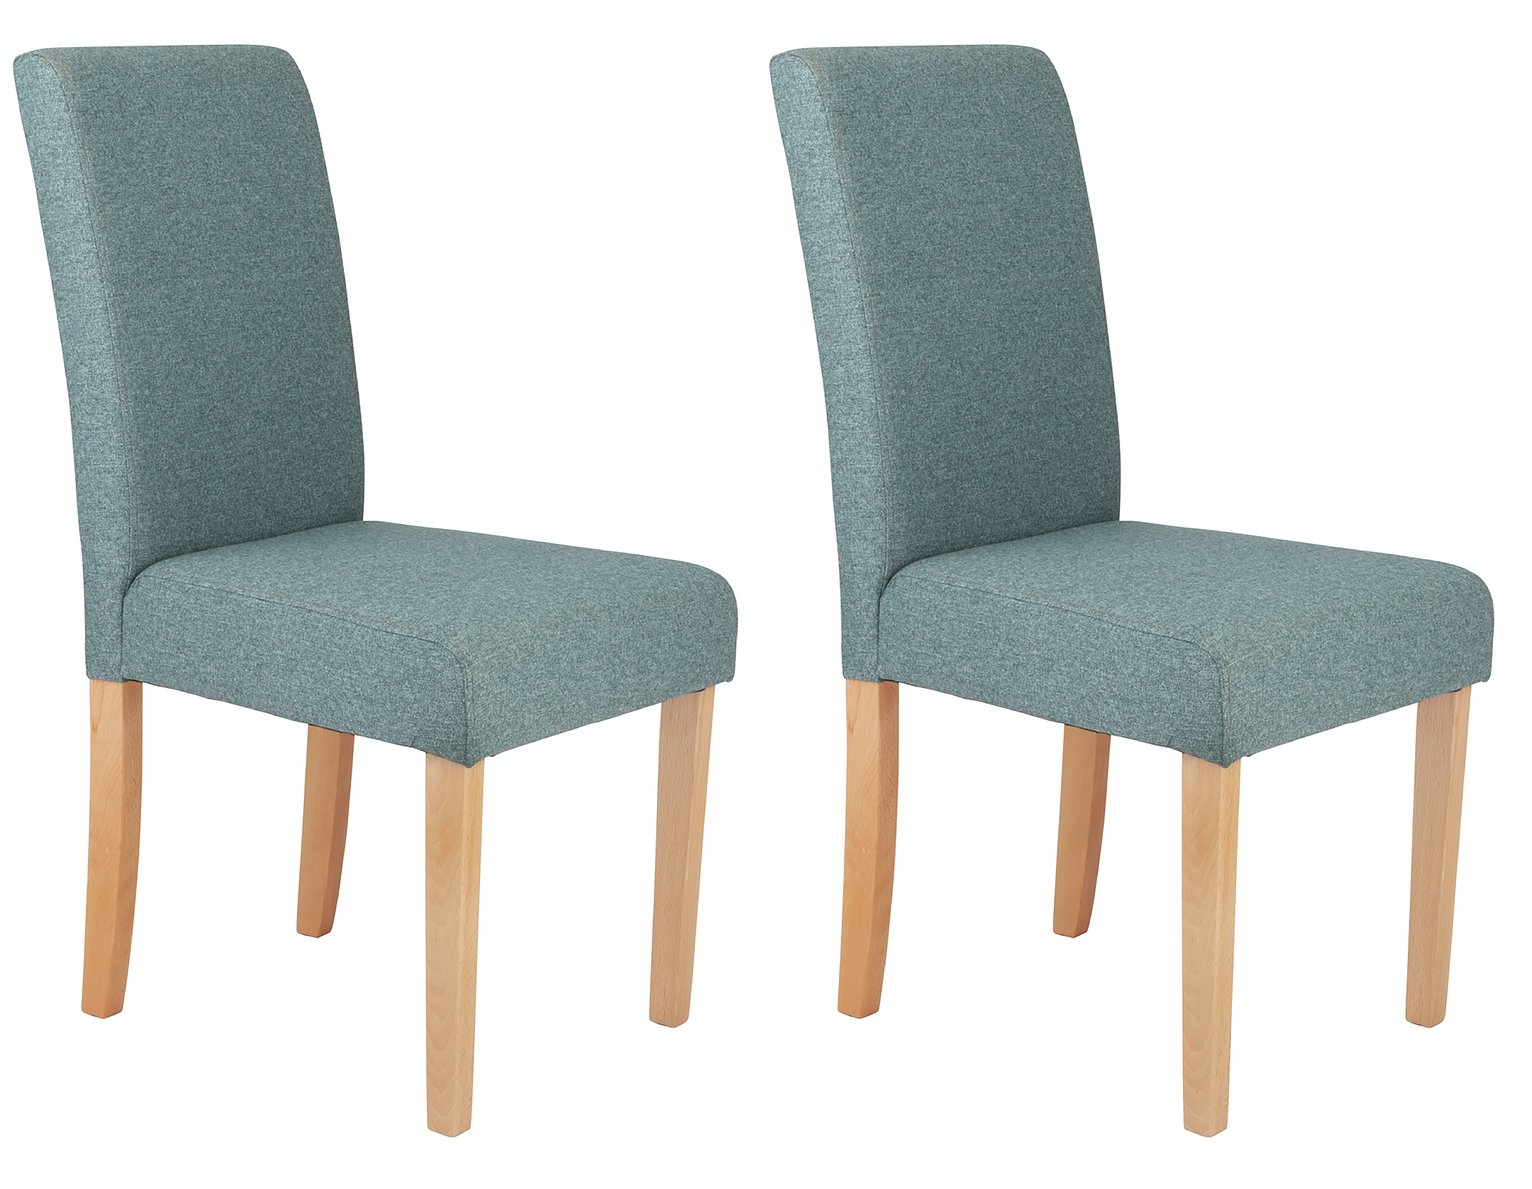 Argos Home Pair of Tweed Mid Back Dining Chairs - Teal